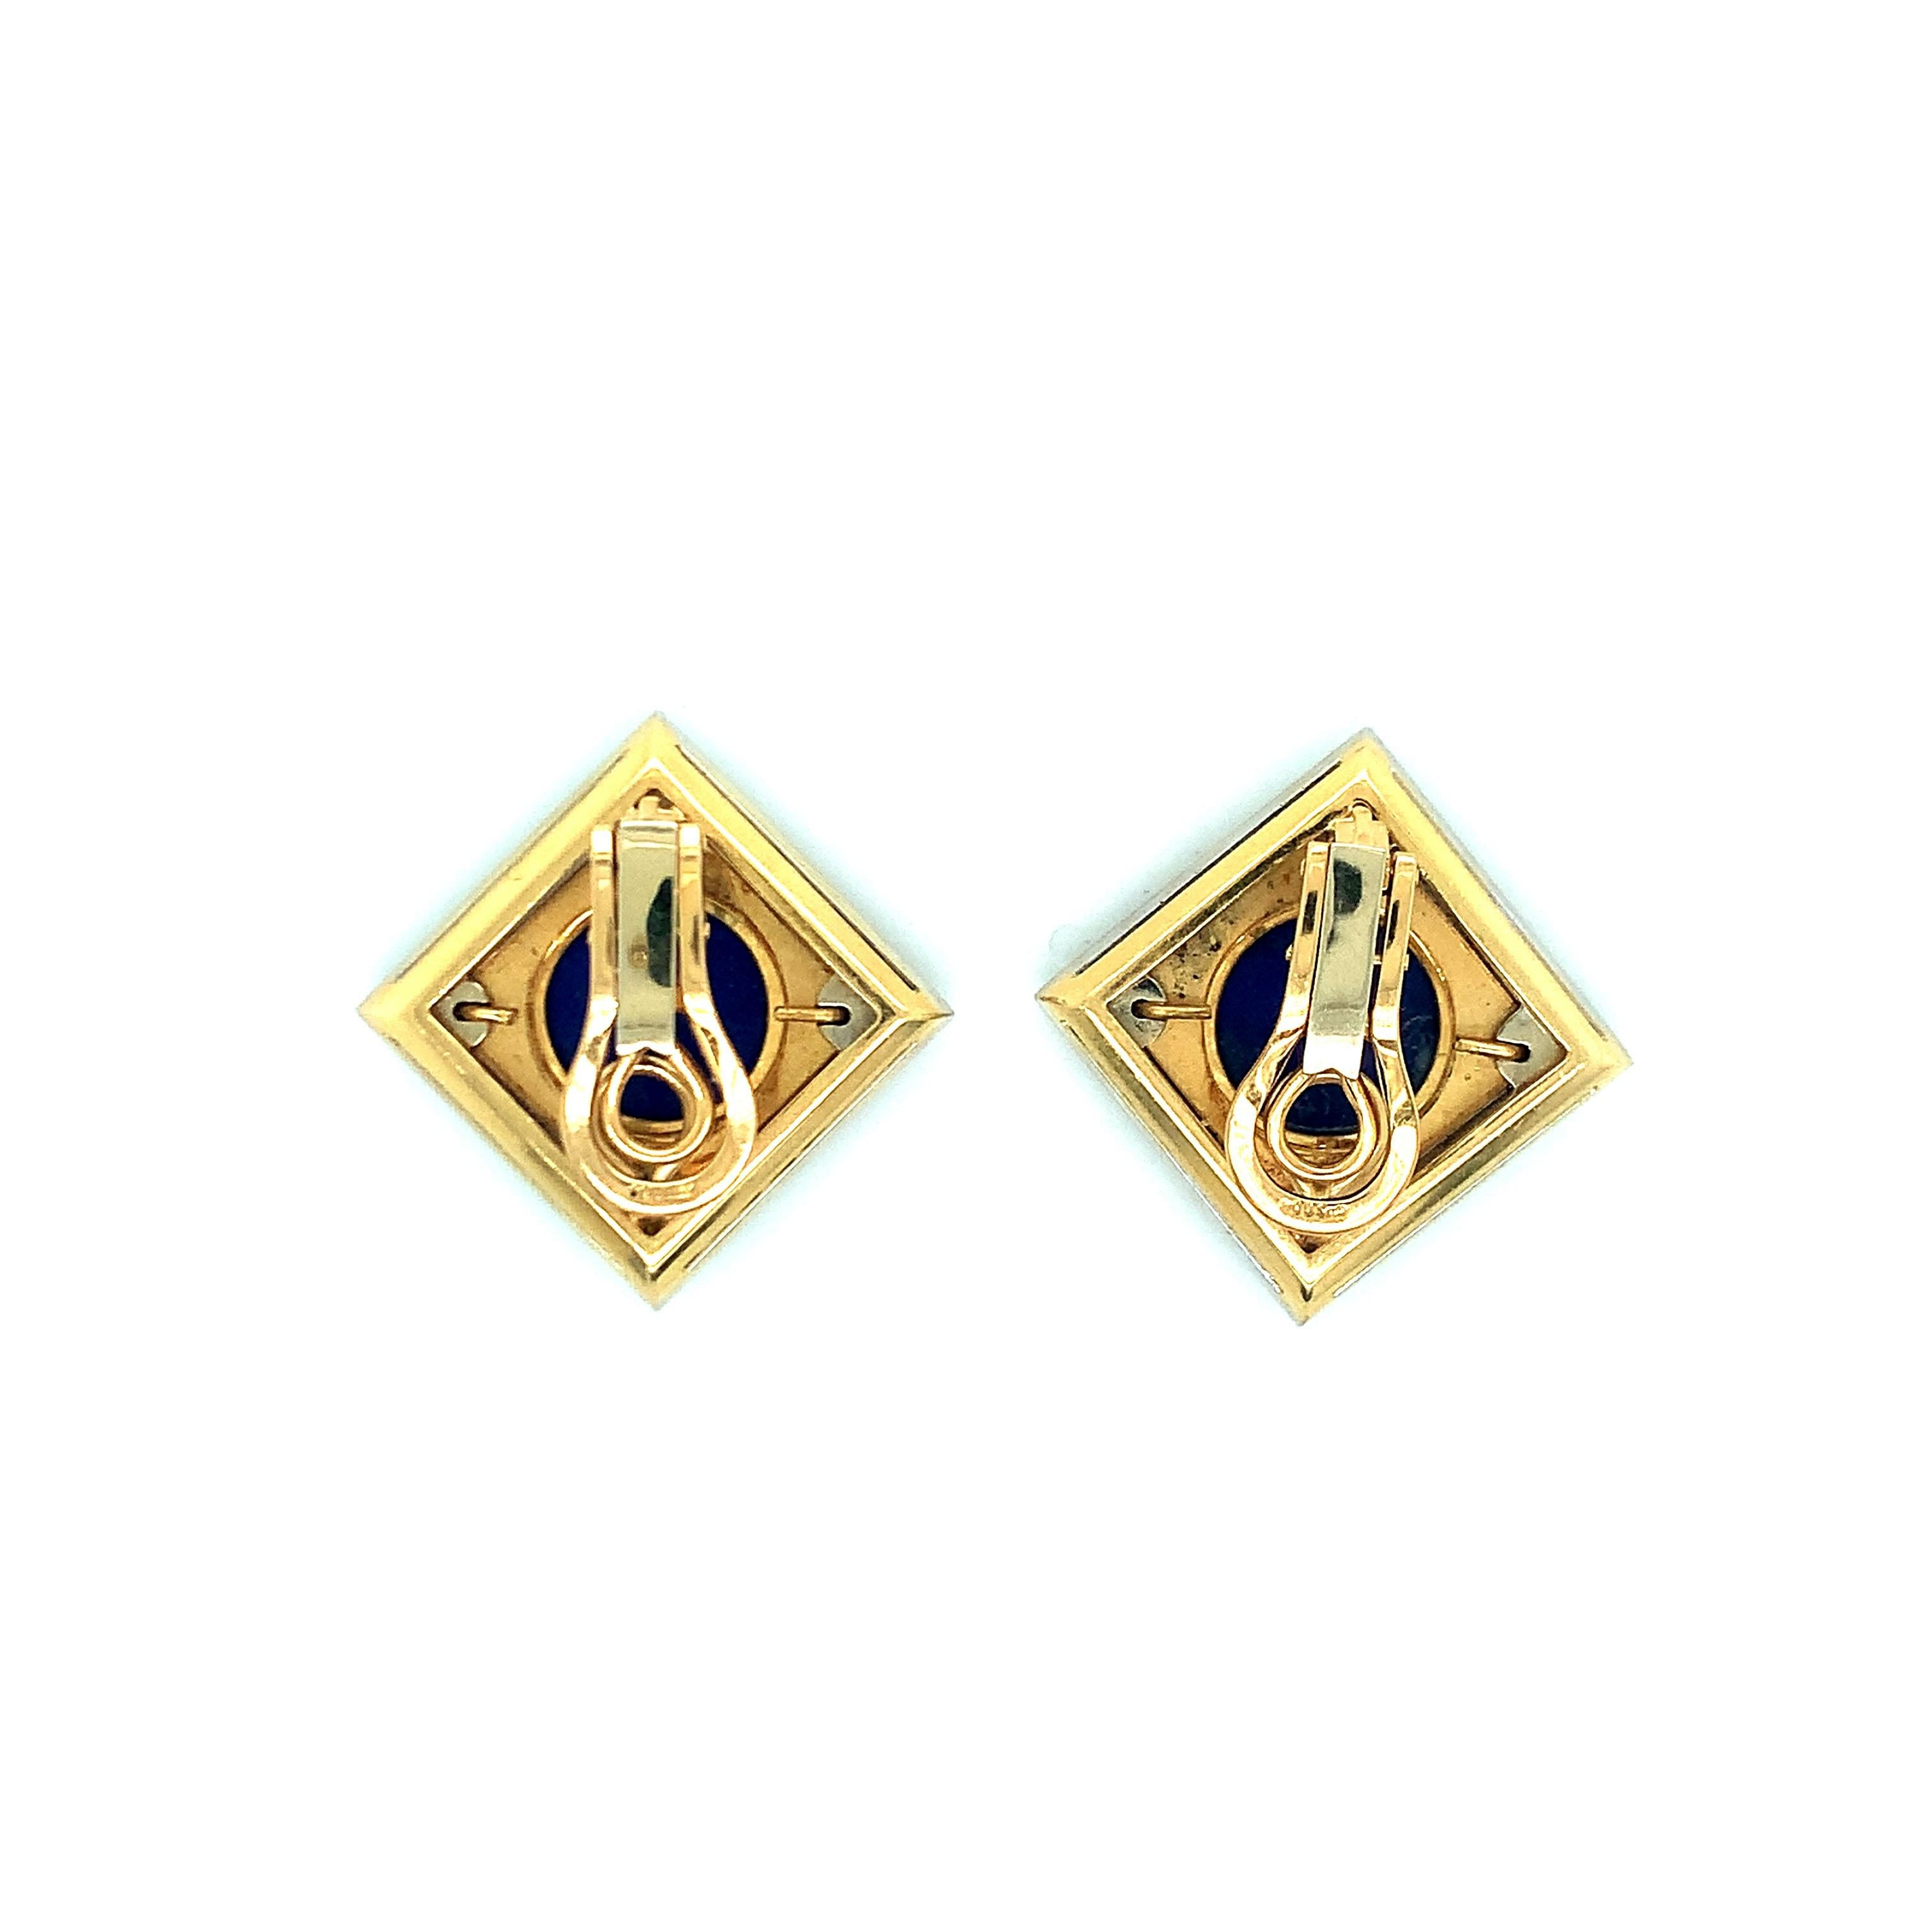 A pair of lapis lazuli and diamond ear clips, featuring 18 karat yellow and white gold. At their center appears a circular lapis lazuli inlay accented with a border of sixty-four round full-cut diamonds totaling approximately 4 carats and graded G-H